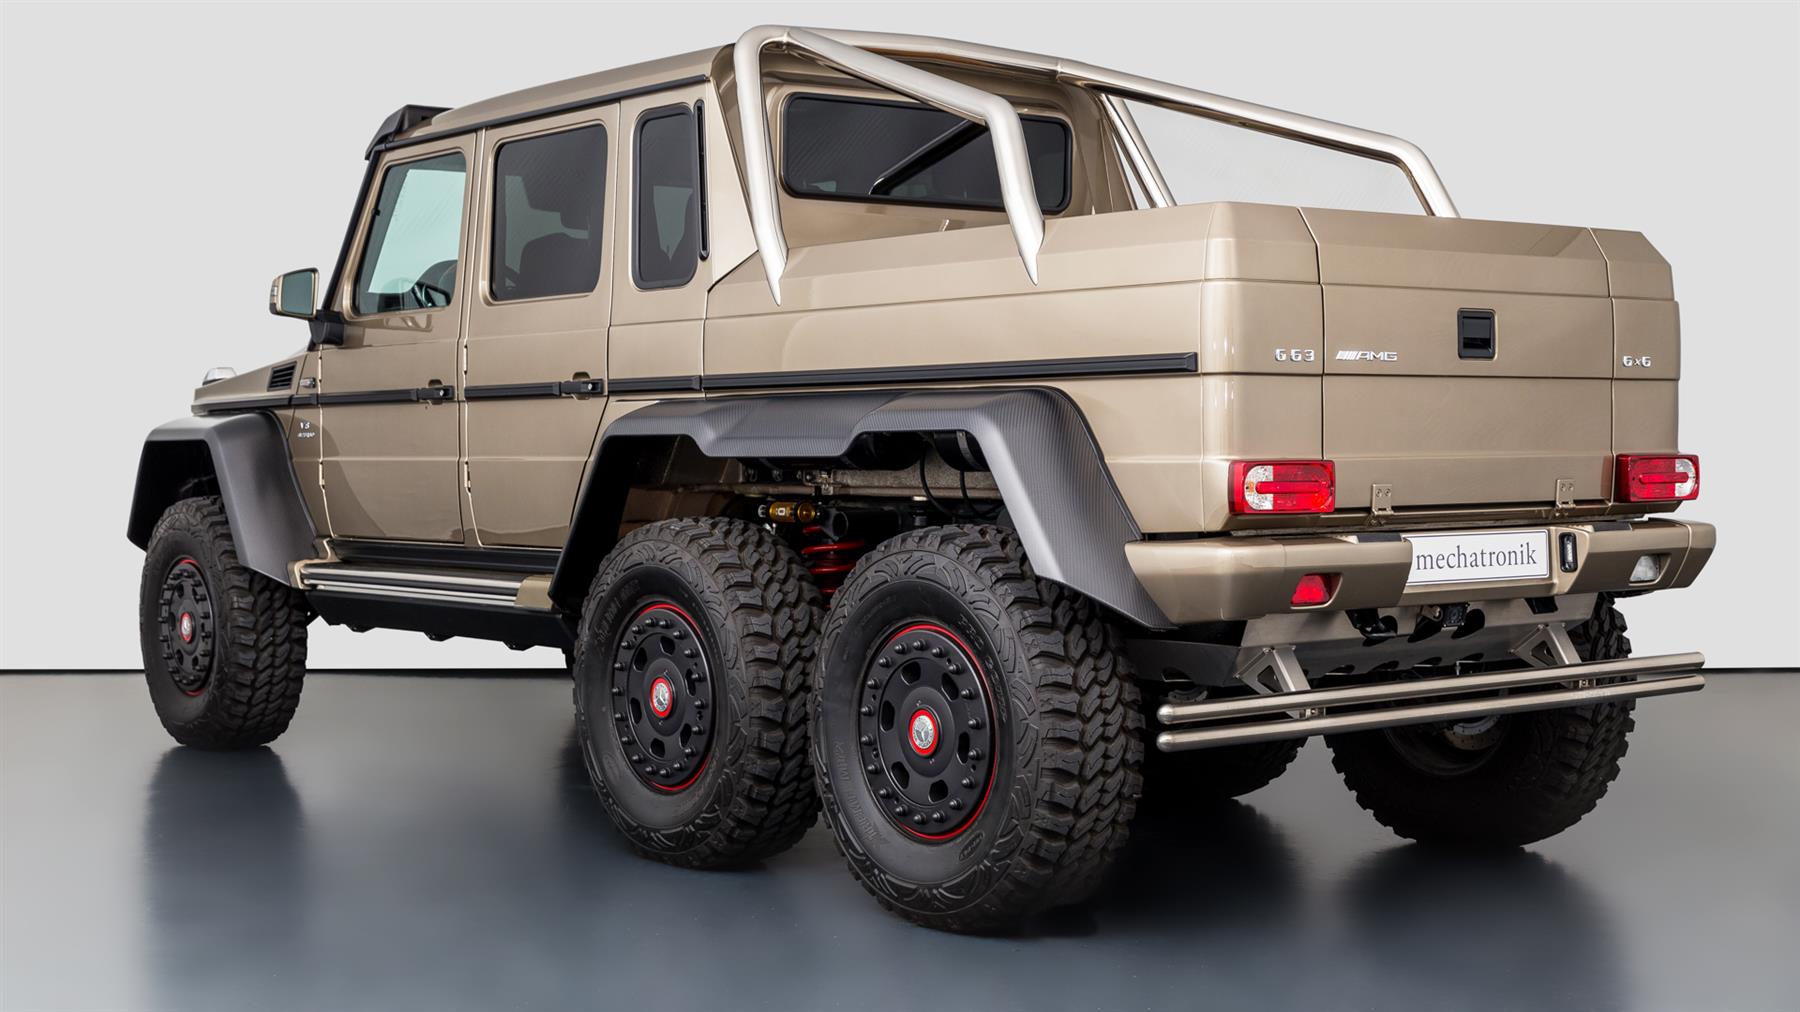 Mercedes Benz G63 Amg 6x6 With Just 143 Miles Is A 1 Million Off Roading Beast Carscoops